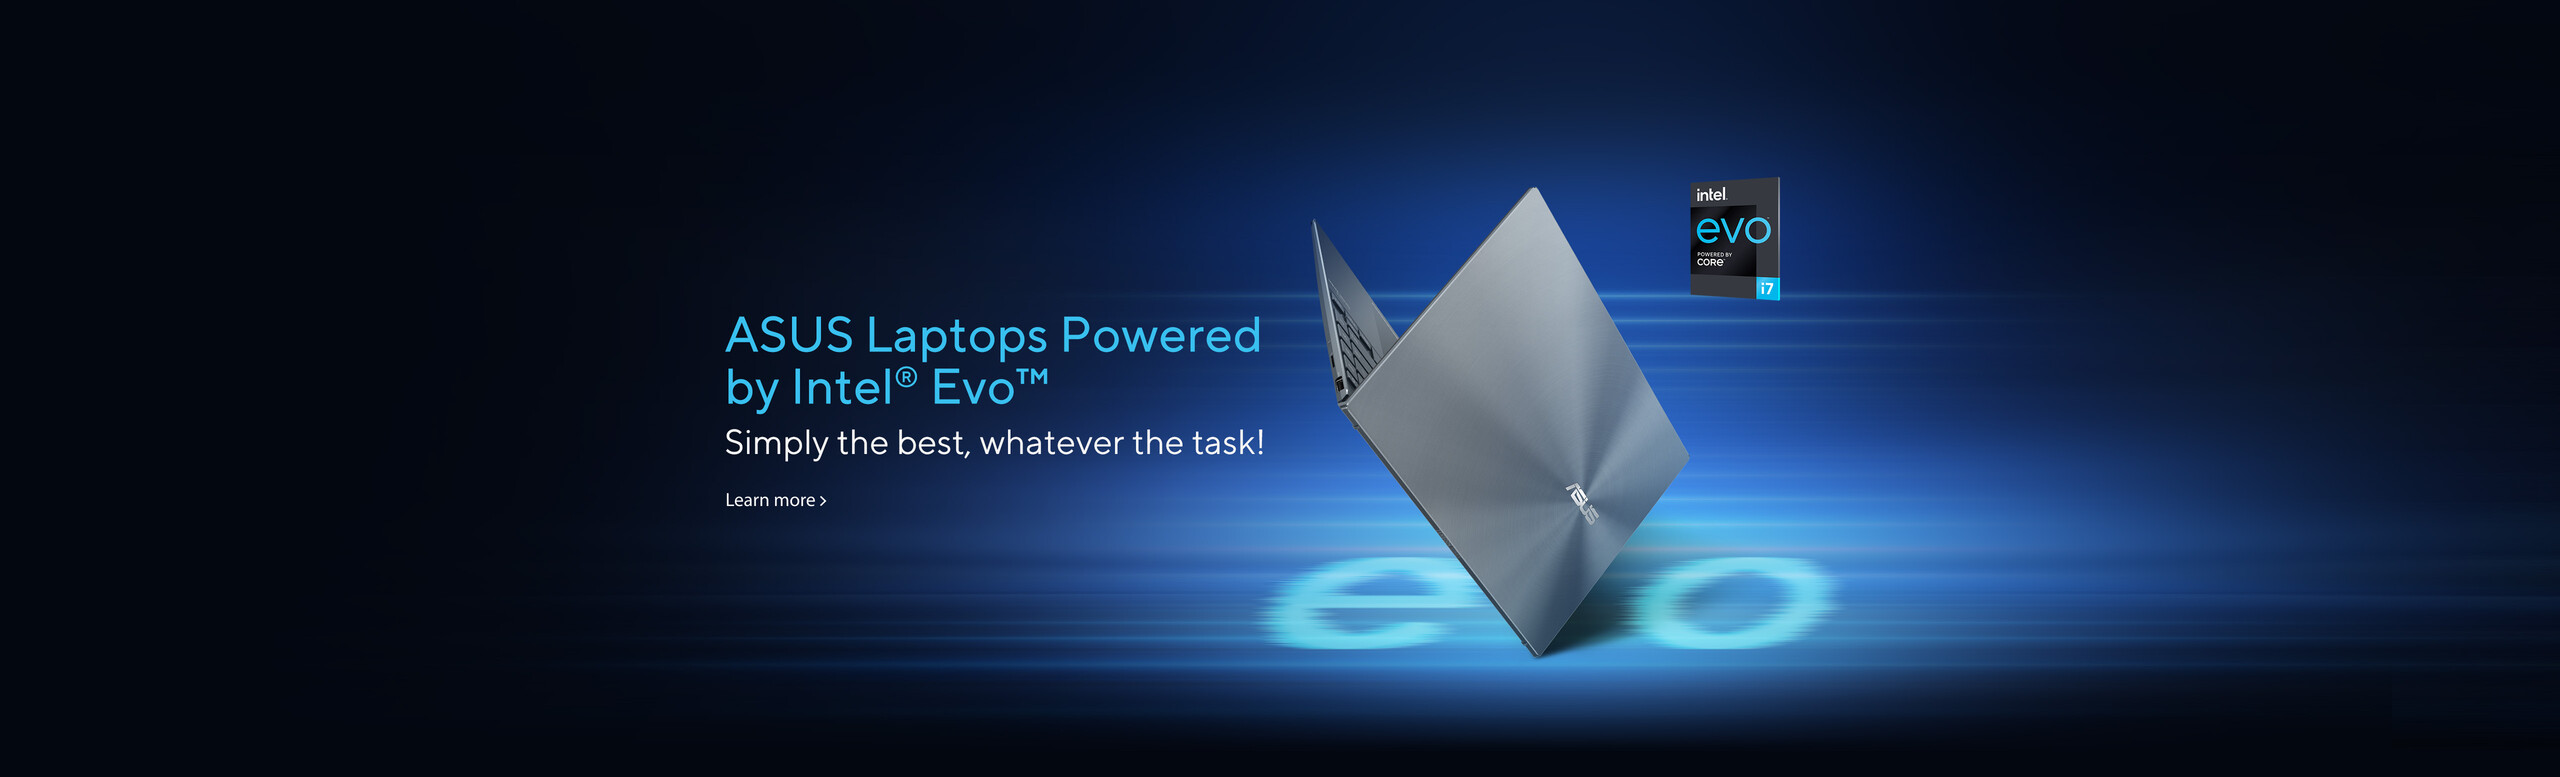 ASUS Laptops Powered by Intel Evo